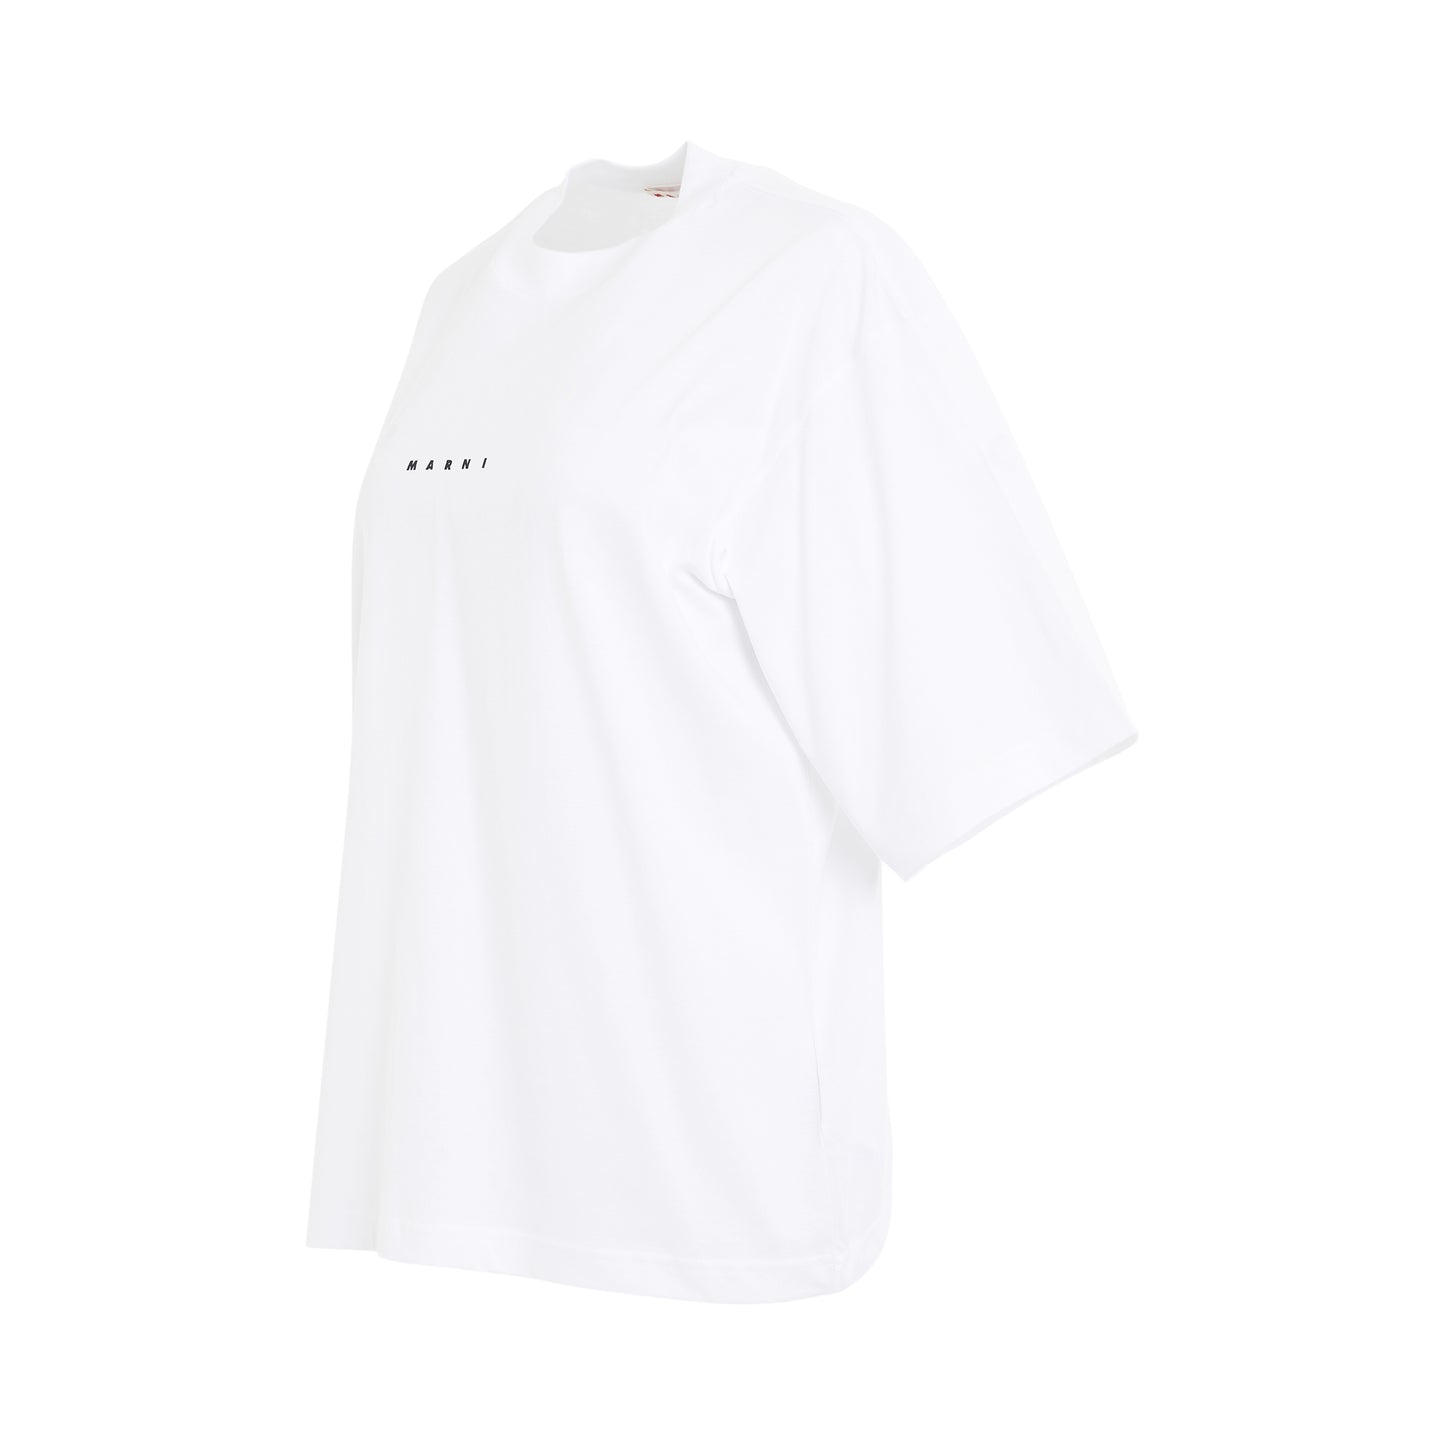 Logo Cotton Jersey T-Shirt in Lily White